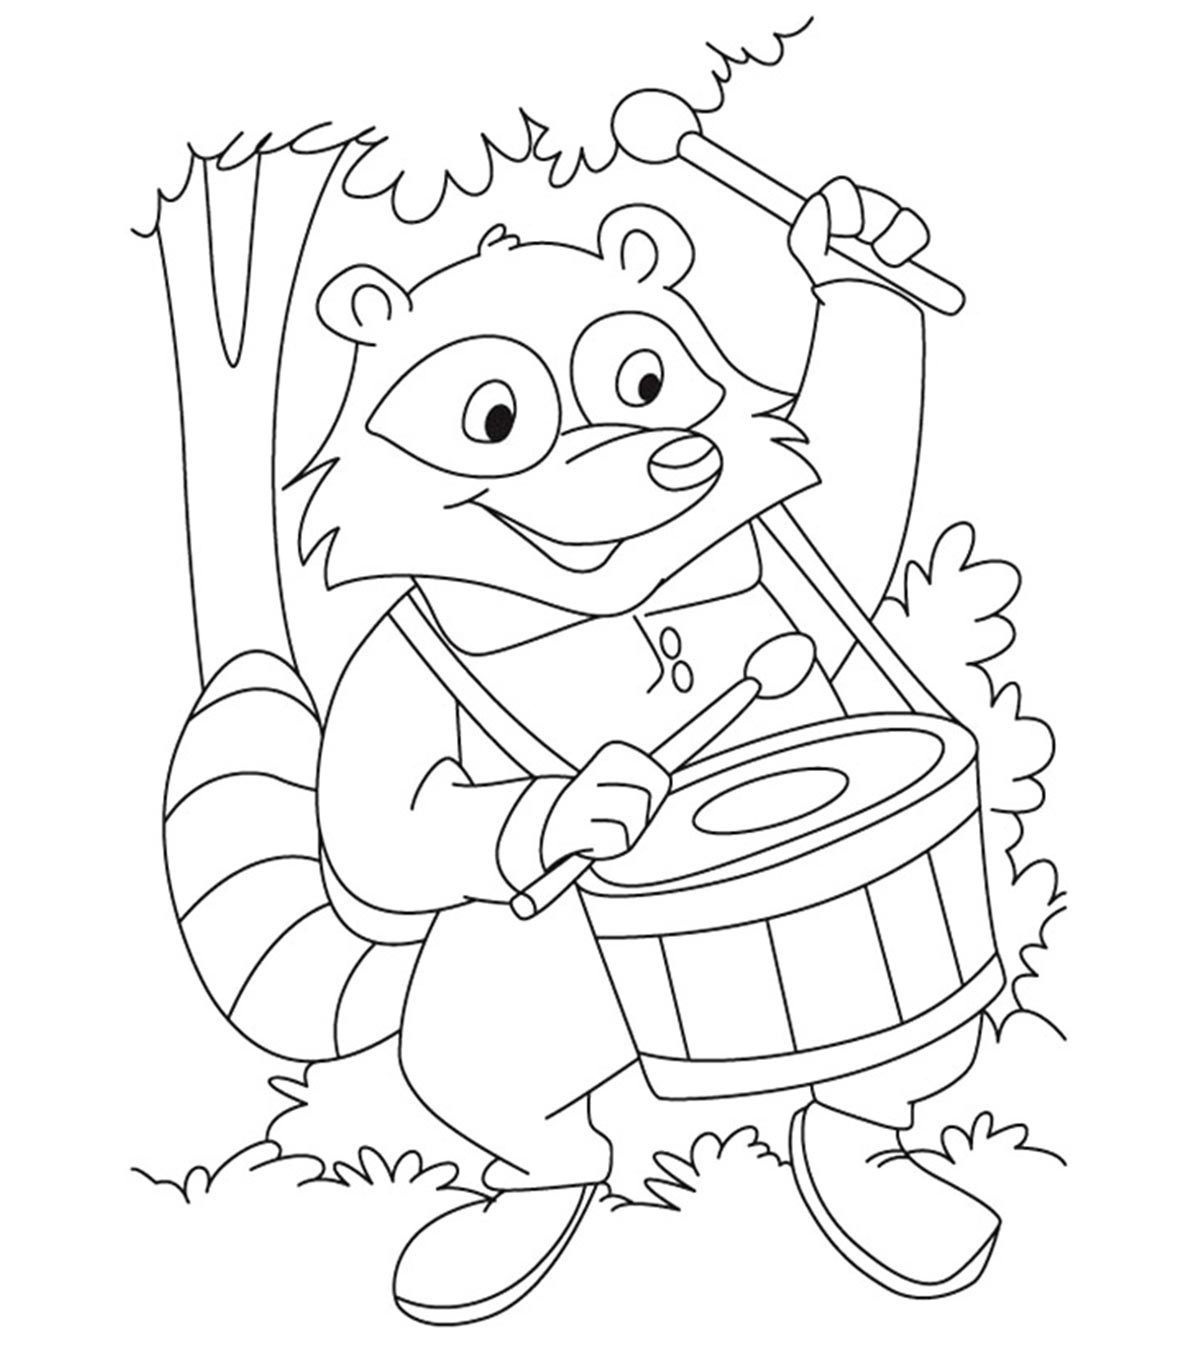 10 Funny Raccoon Coloring Pages Your Toddler Will Love To Color_image